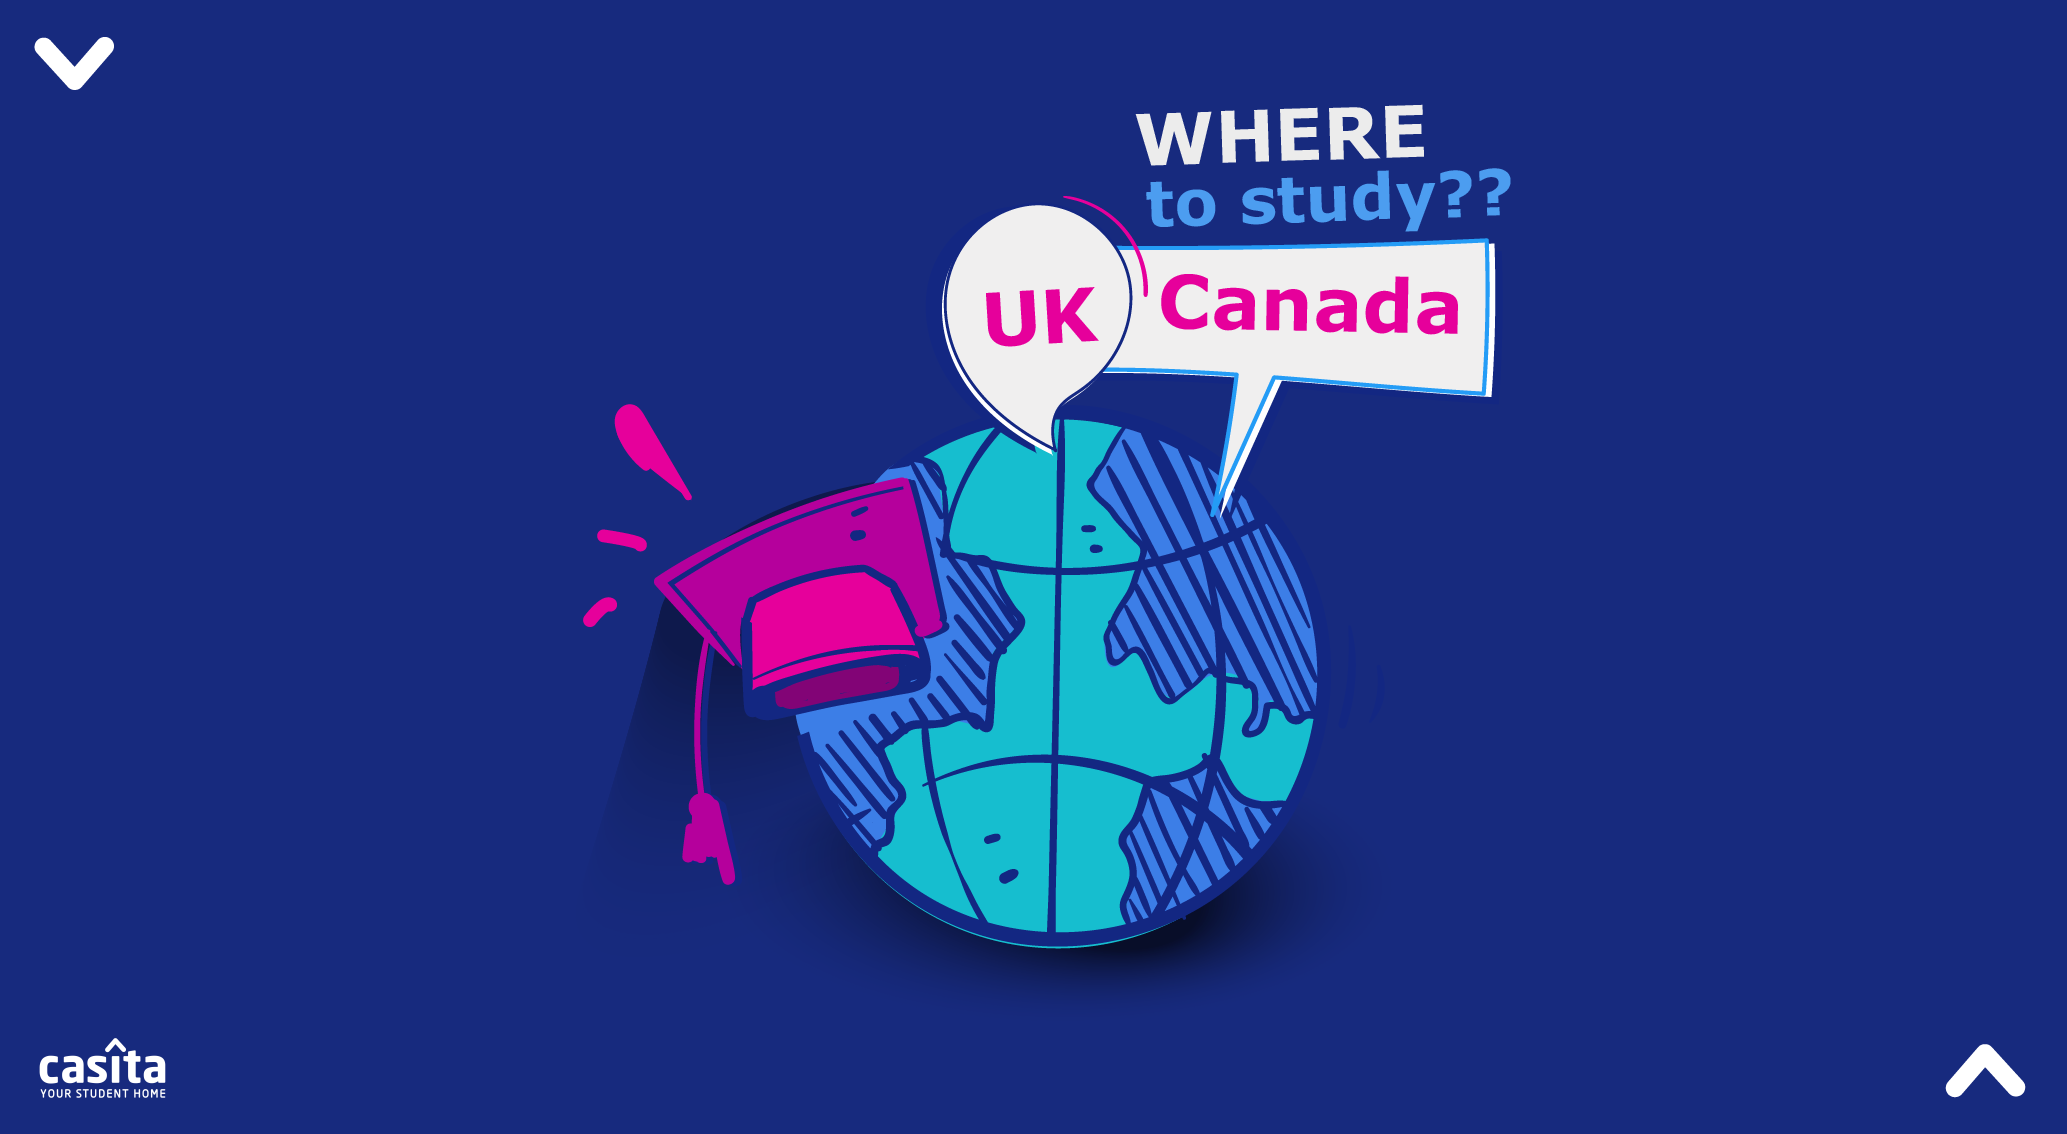 Where Should You Study Abroad? UK vs Canada